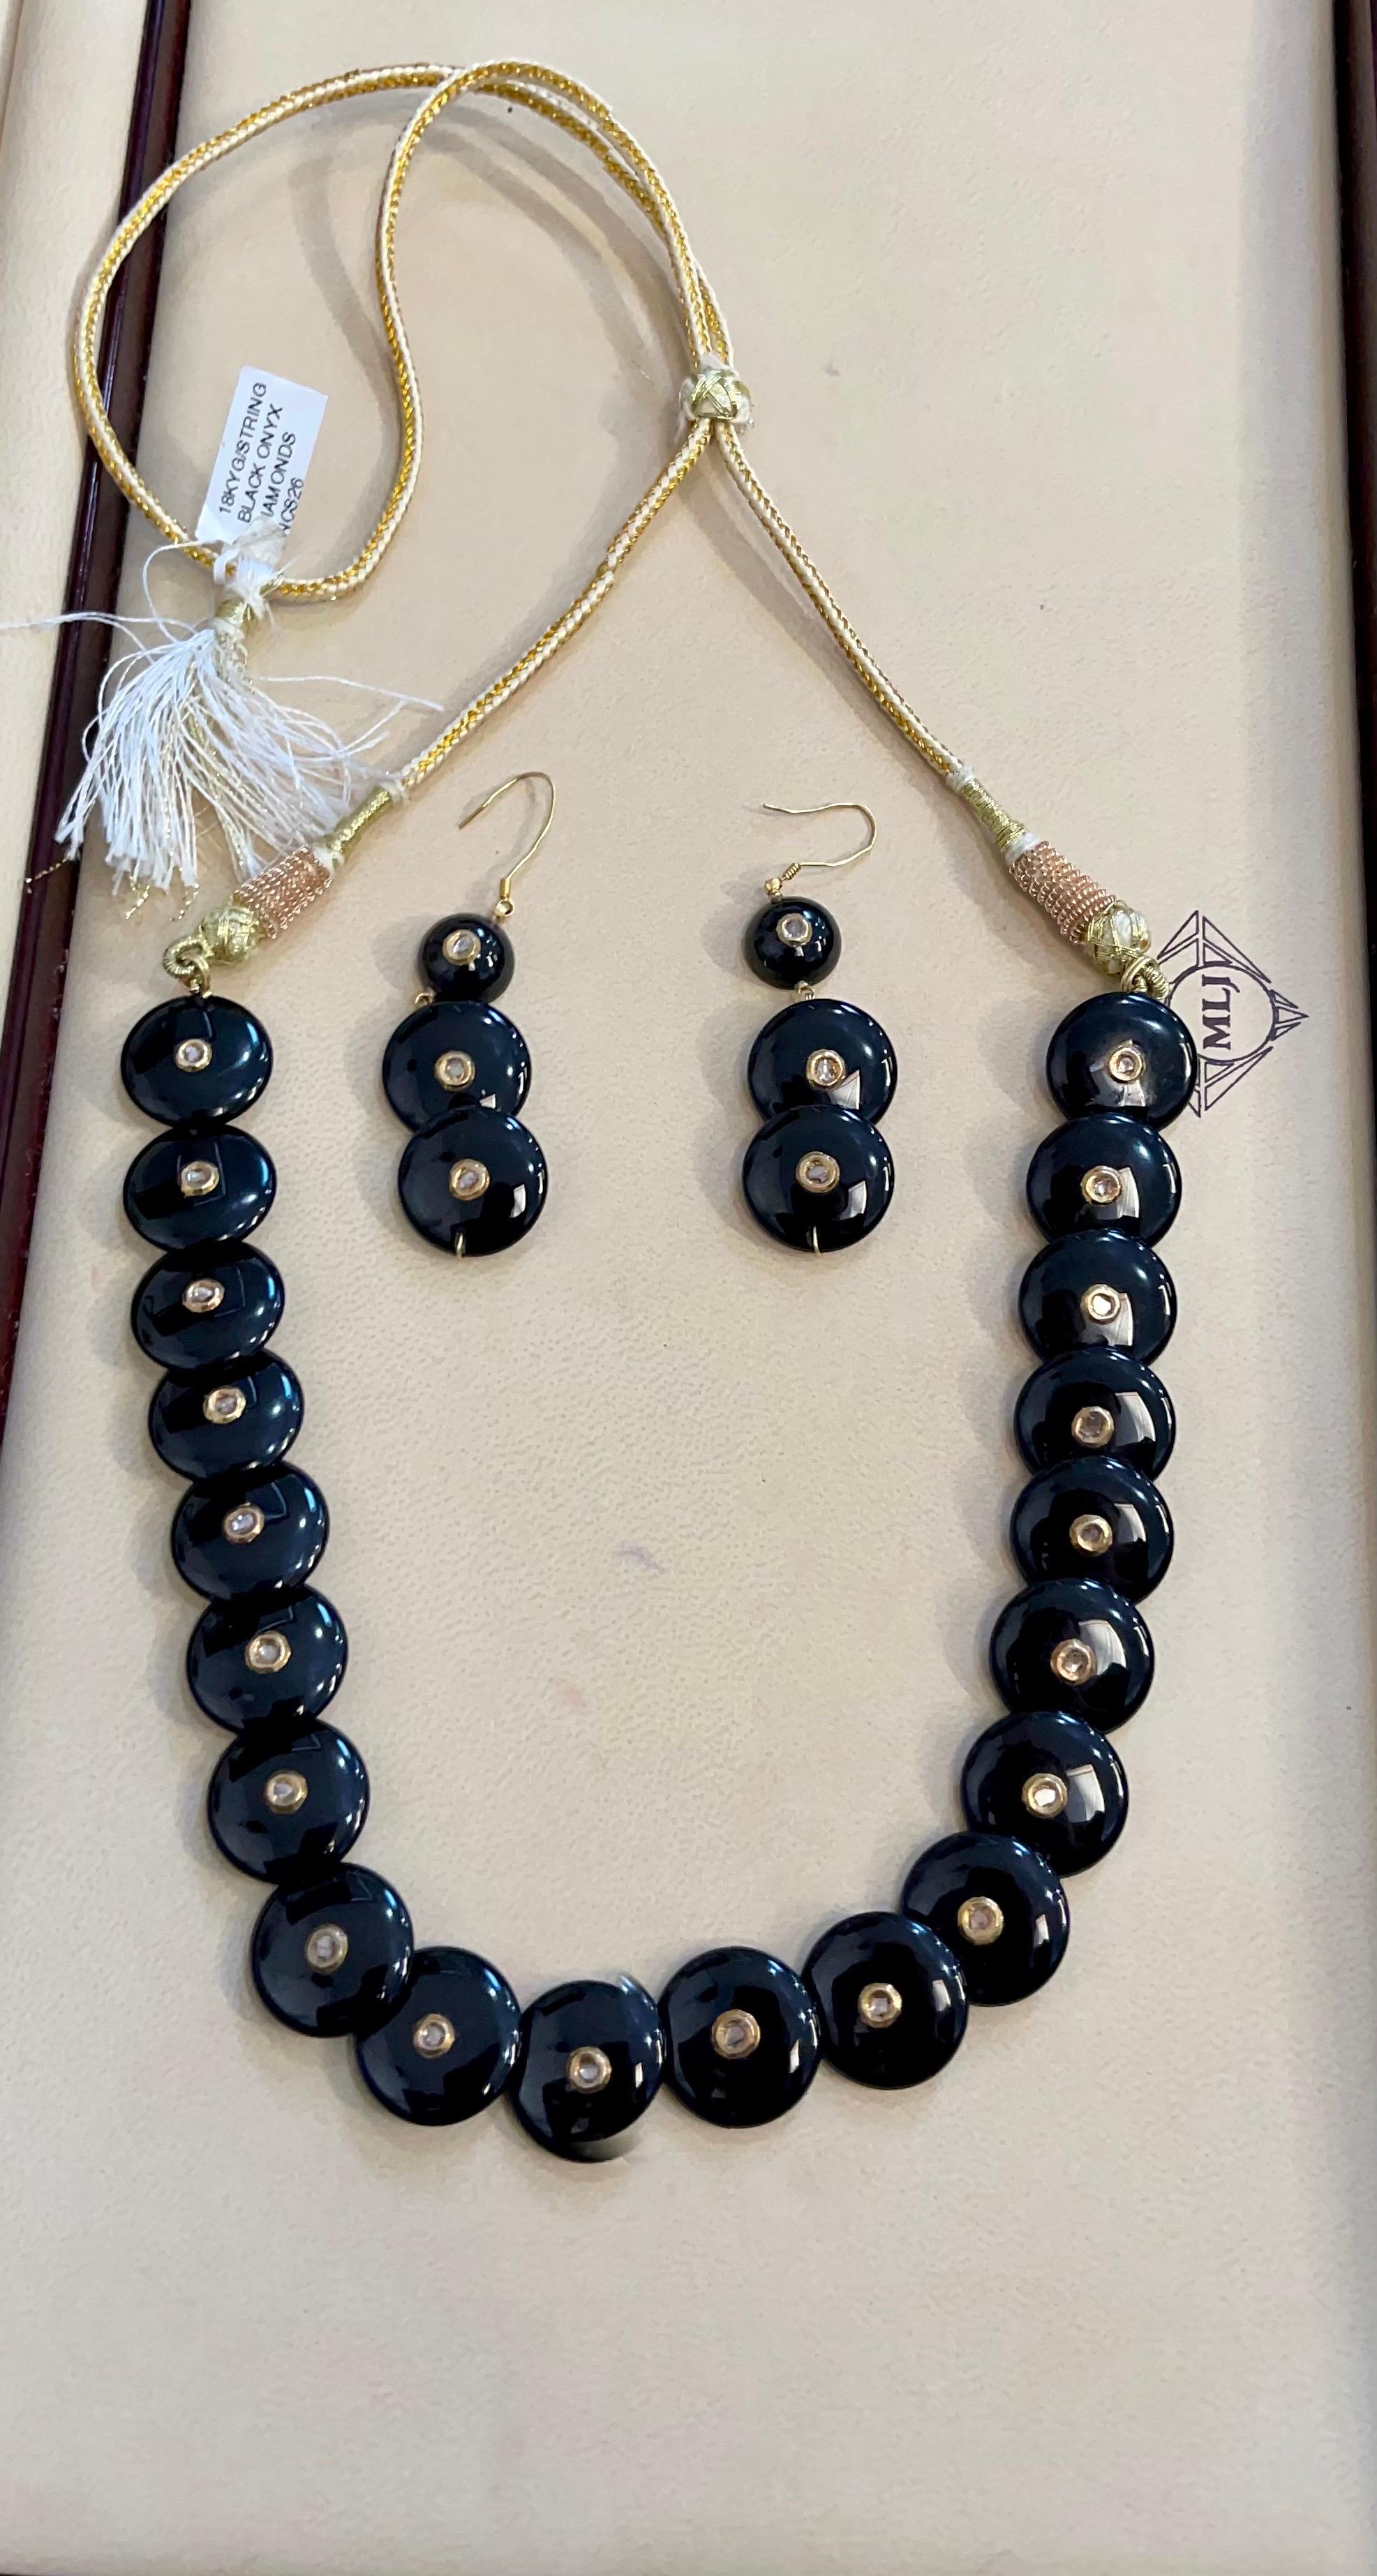 Round Circle Black Onyx with Rose Cut Diamond 18 Karat Gold Necklace, Earrings For Sale 1